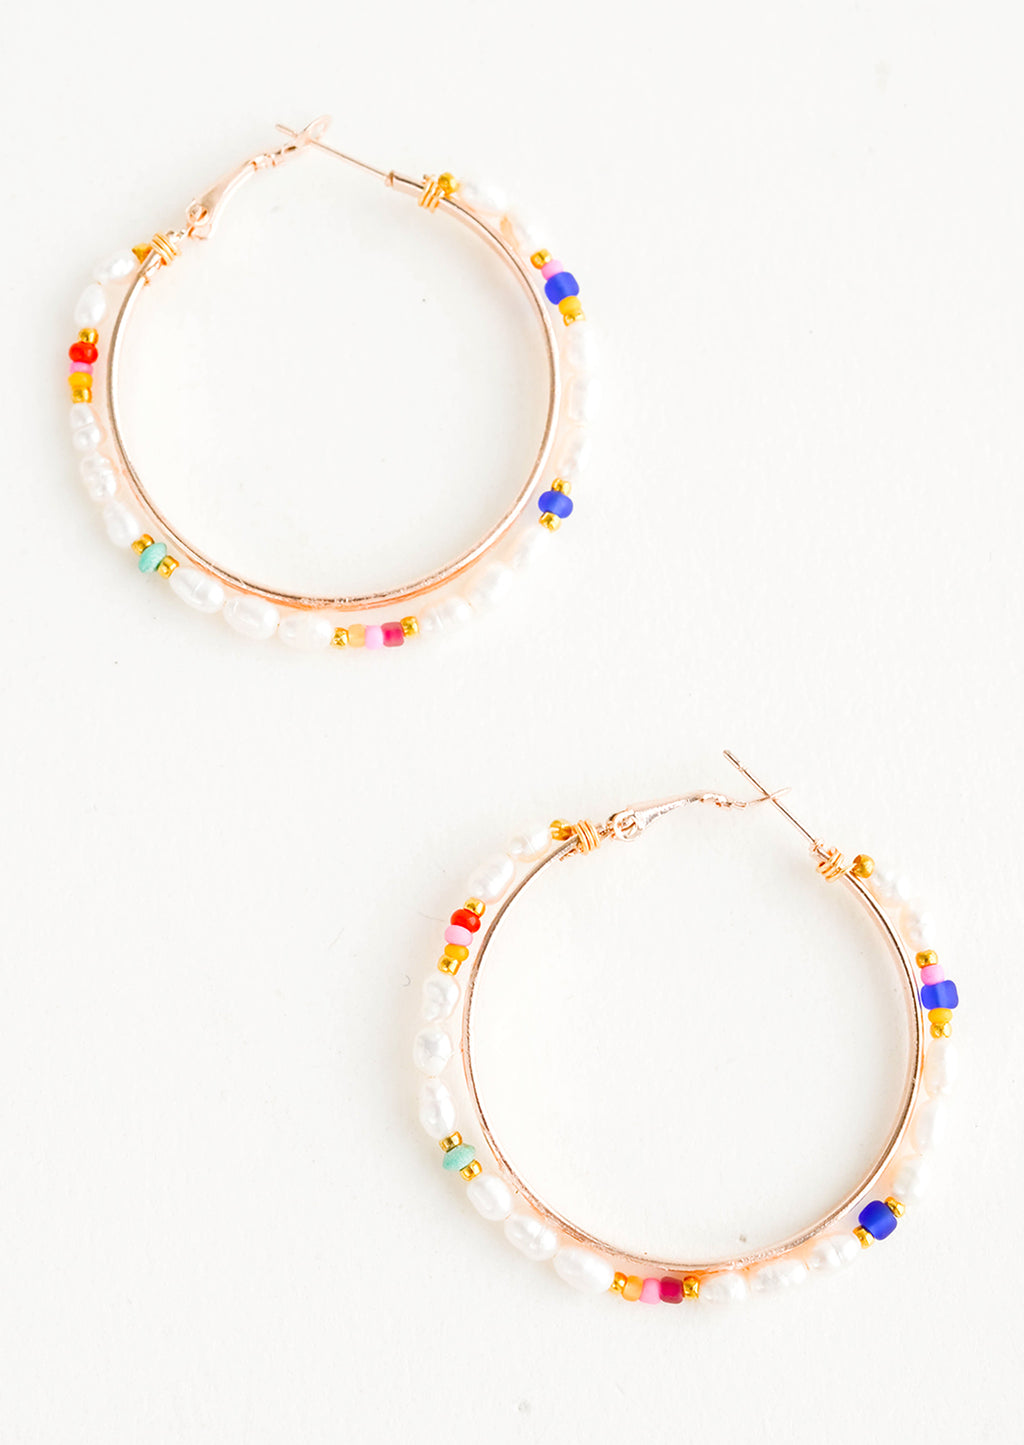 1: Round hoop earrings with beaded outer layer of pearls and colored glass seed beads and rosegold inner hoop